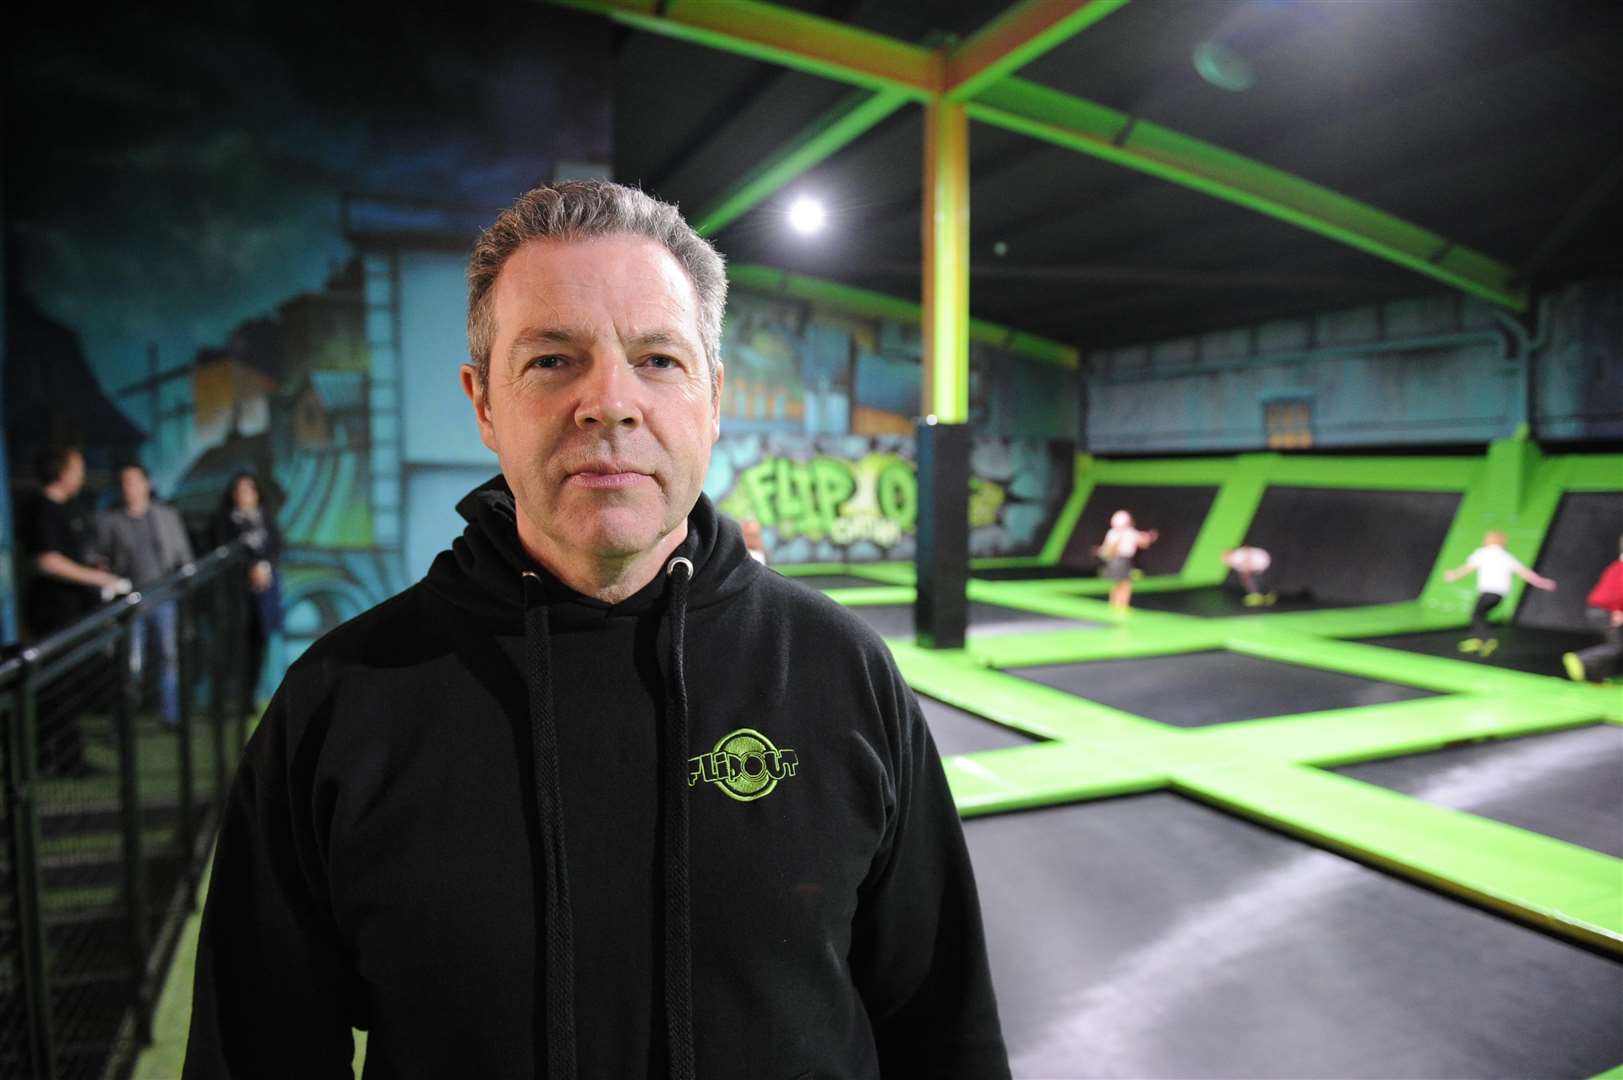 Flip Out Trampoline Centre owner.Mark McGill